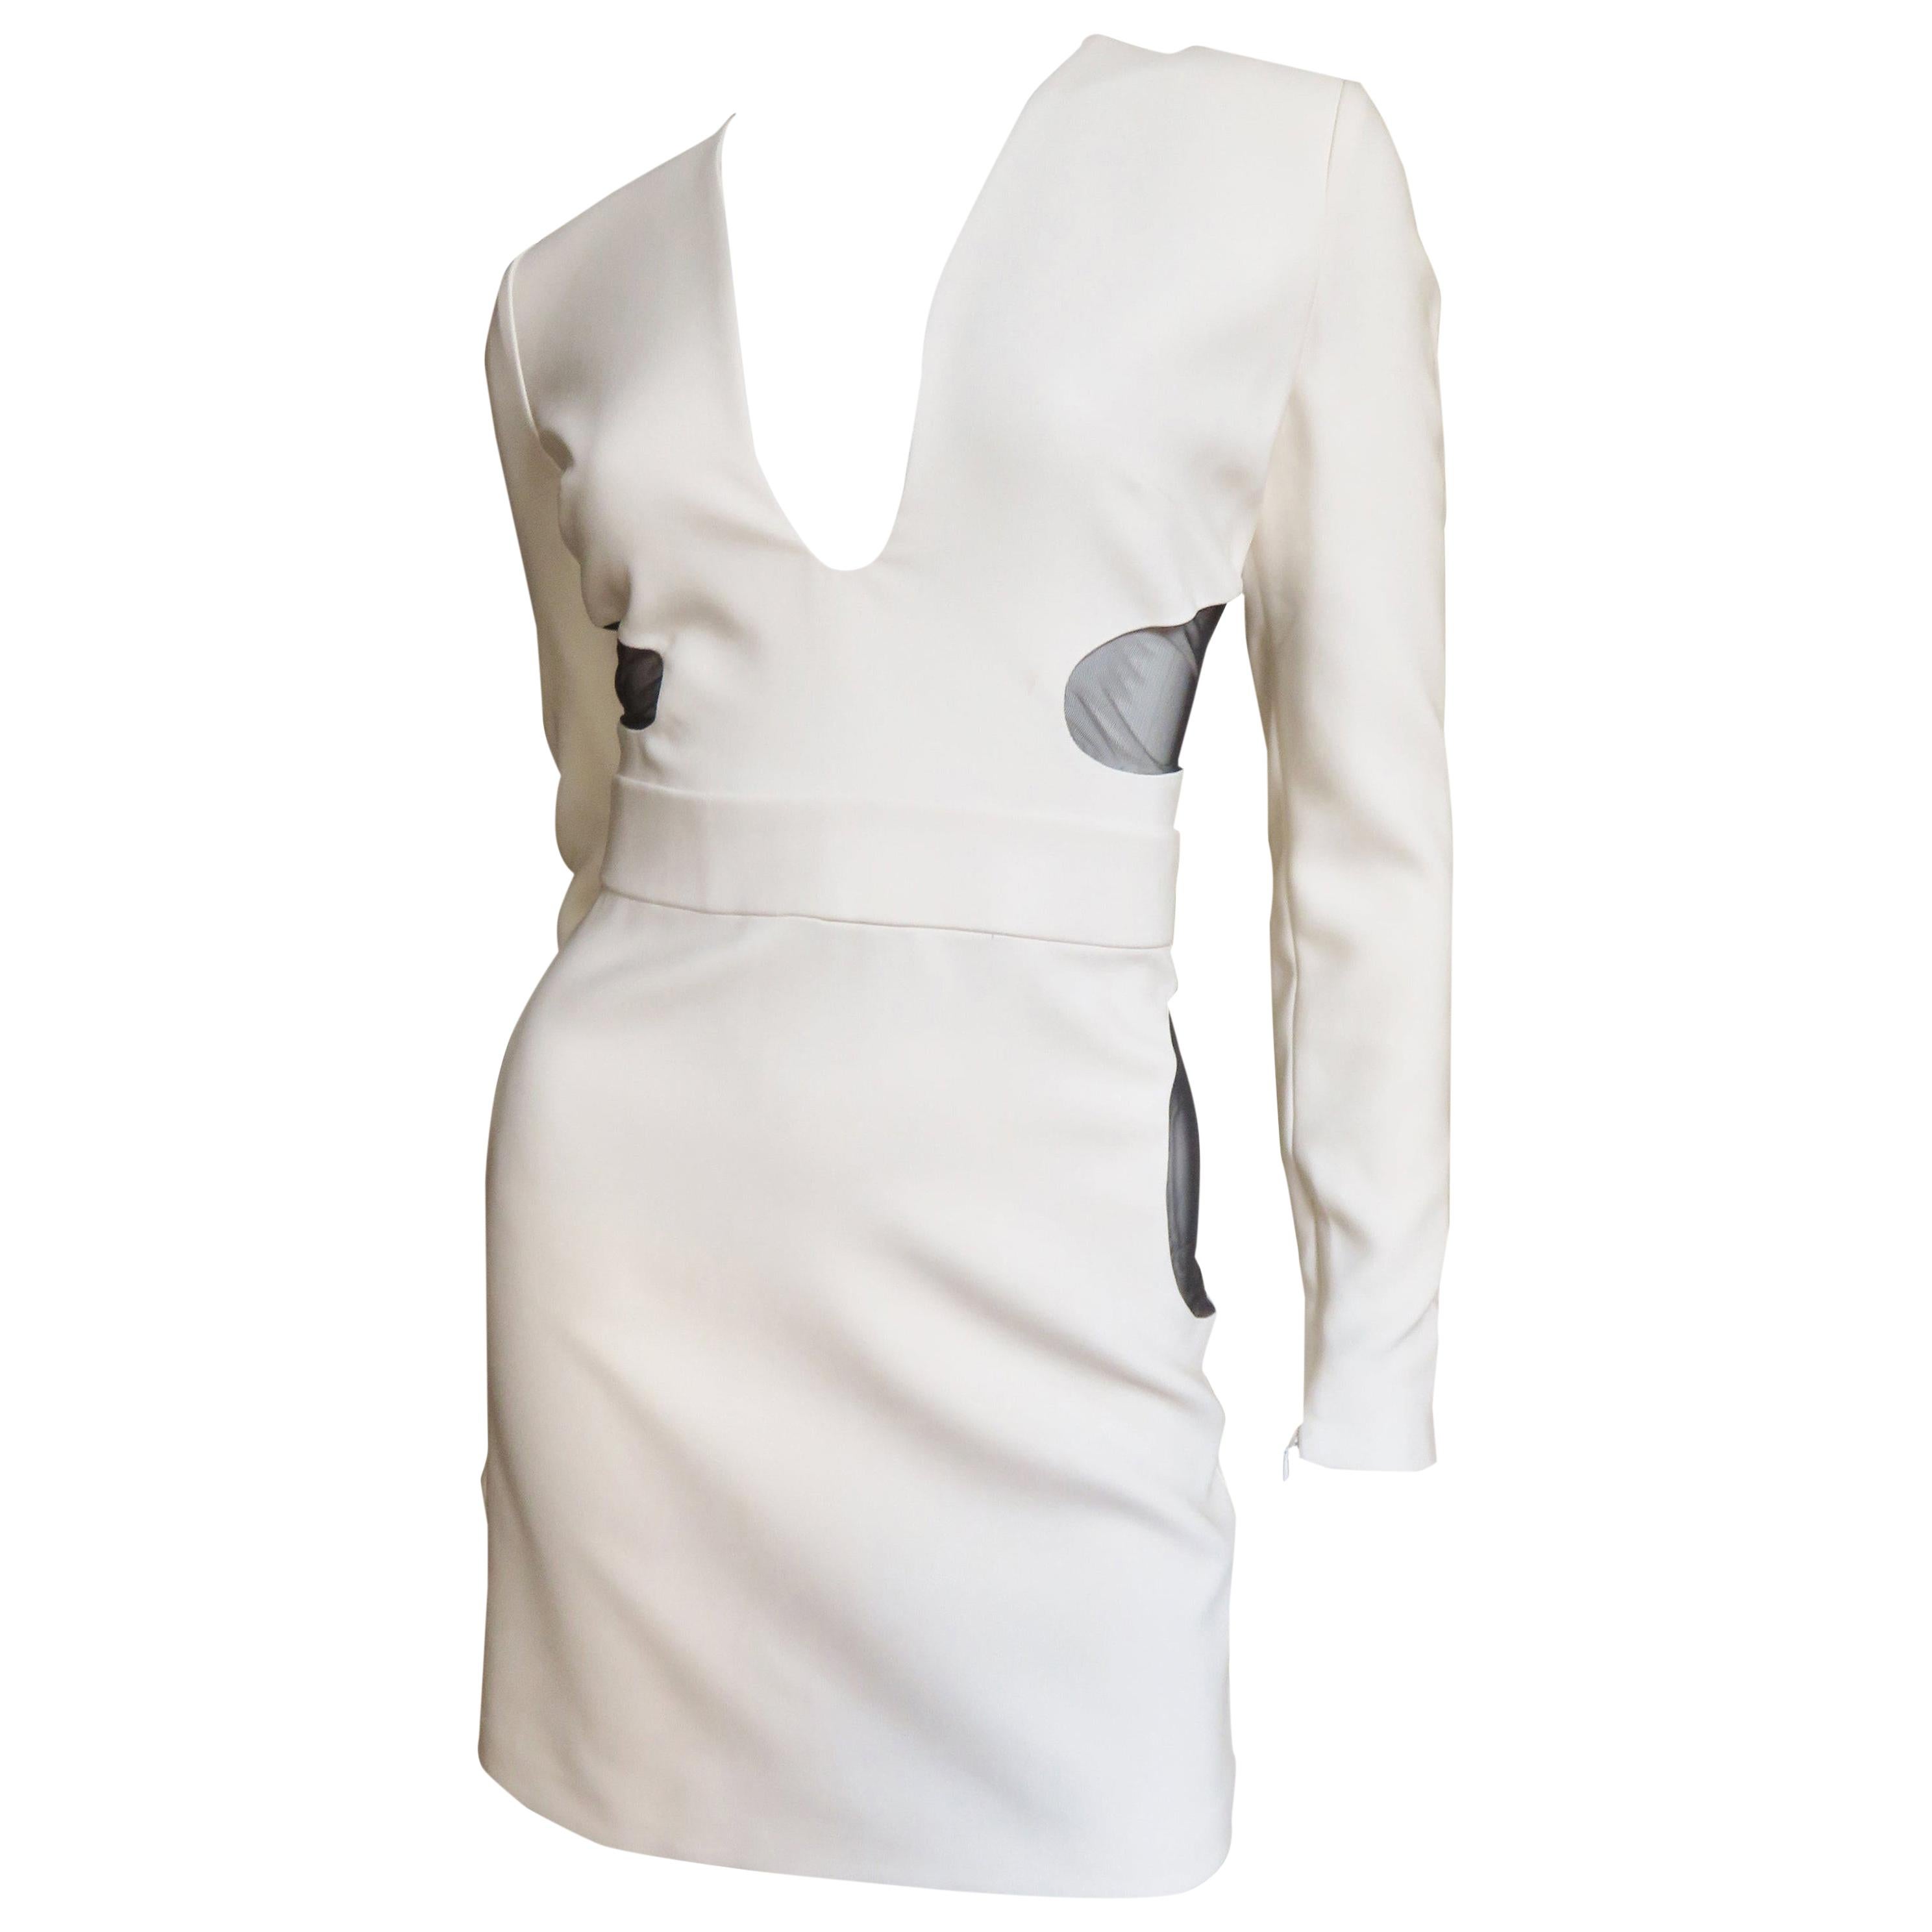 Tom Ford New Plunge Dress with Cut outs